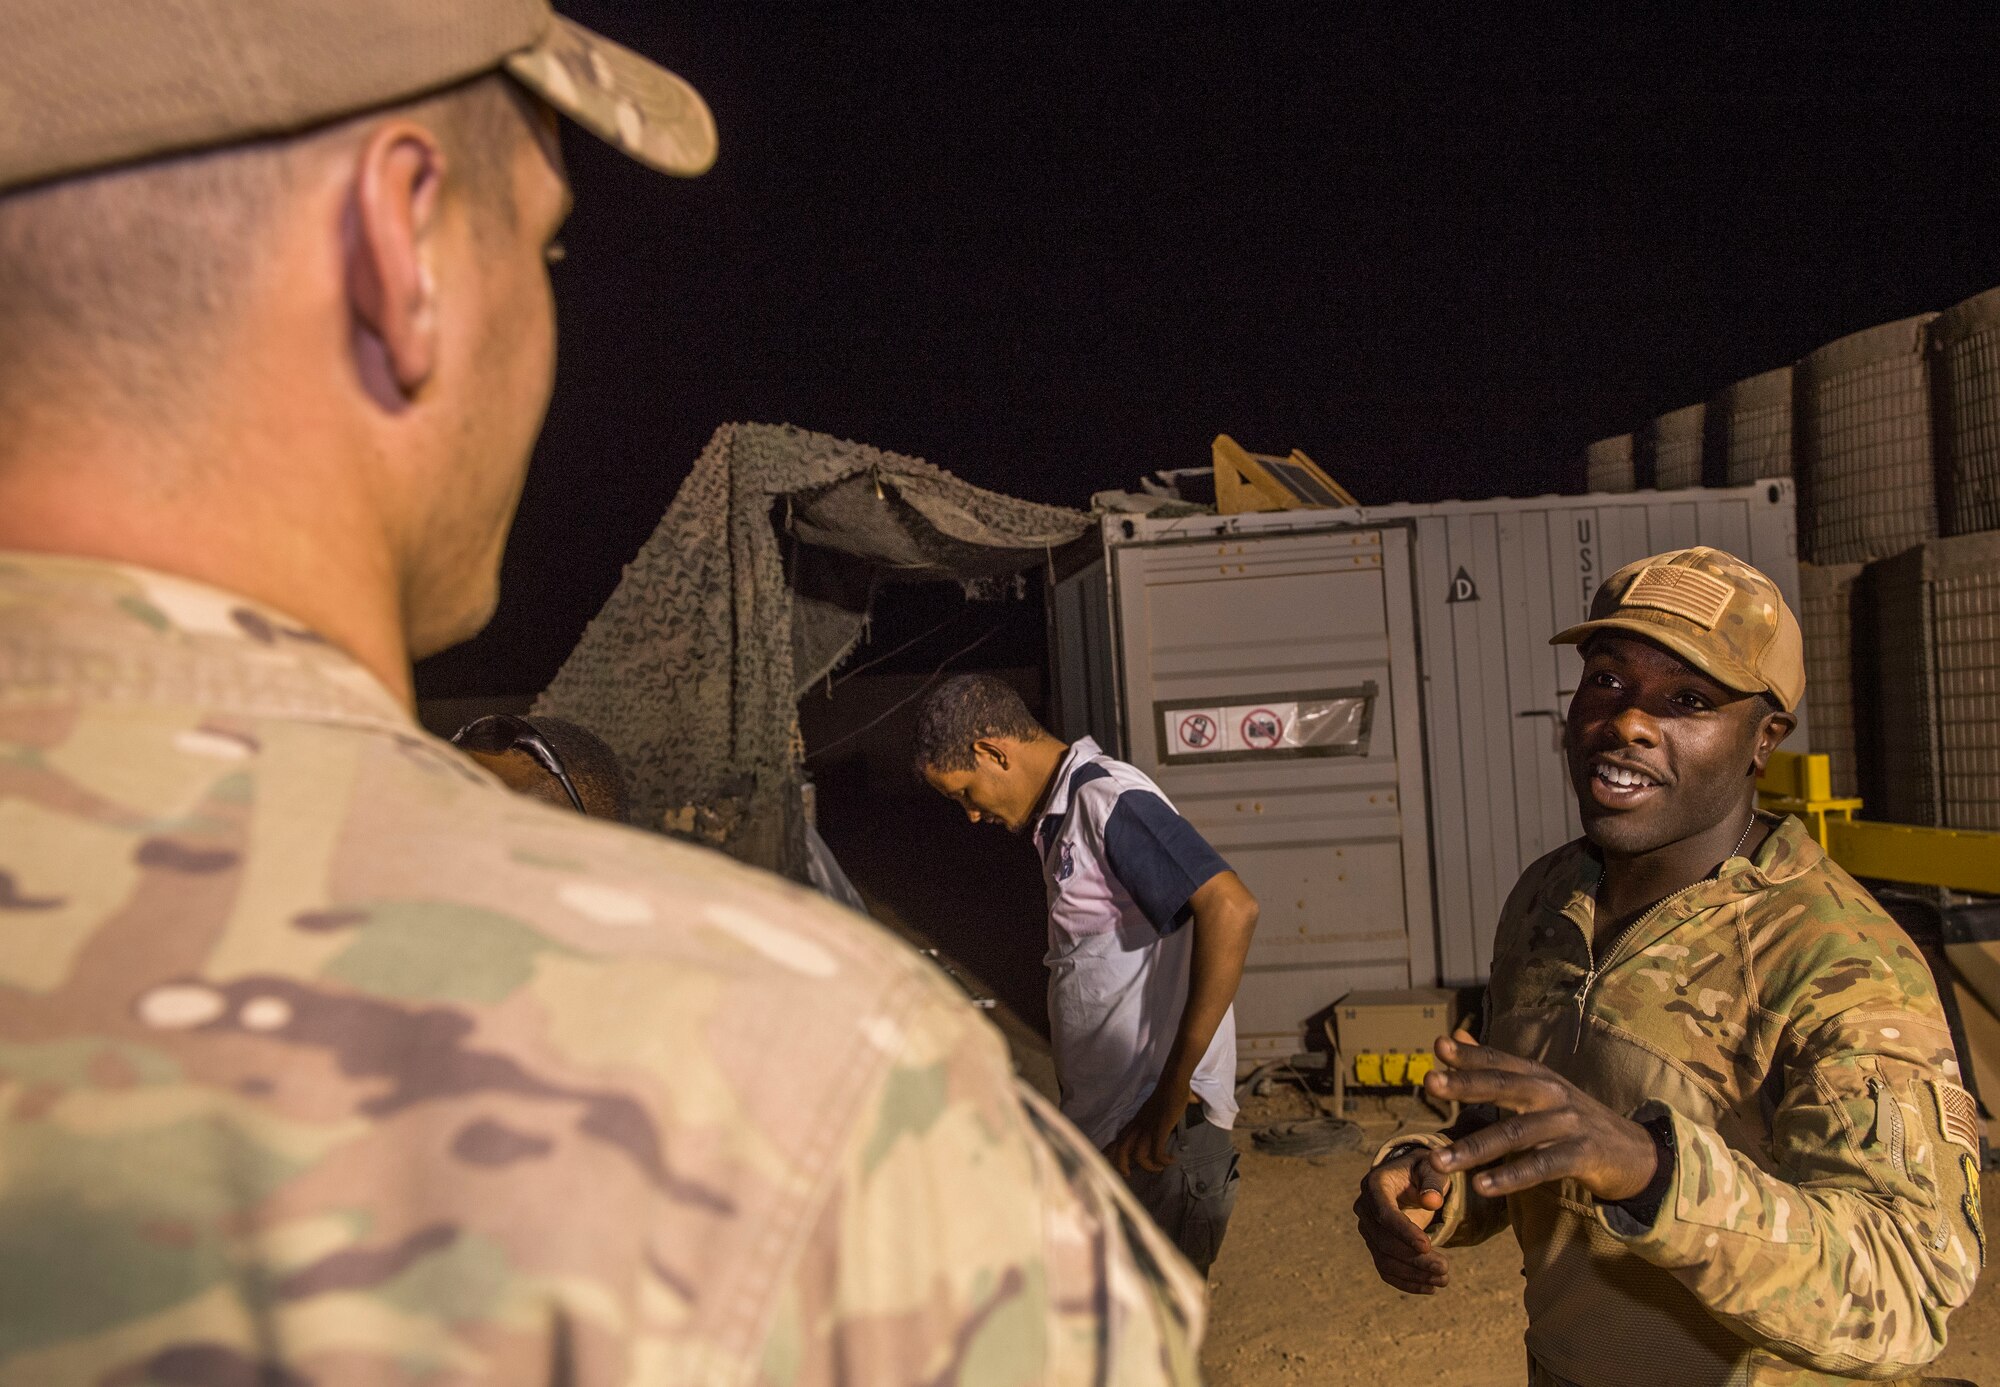 U.S. Air Force Staff Sgt. Mackenzie Isidor, 822nd Expeditionary Base Defense Squadron fire team leader, talks with Senior Airman Austen Gann, 822nd EBDS fire team member, during a night shift at Nigerien Air Base 201, in Agadez, Niger, Feb. 26, 2018. Isidor and Gann are deployed to Nigerien Air Base 201 from Moody Air Force Base, Georgia. (U.S. Air Force photo by Tech. Sgt. Nick Wilson)